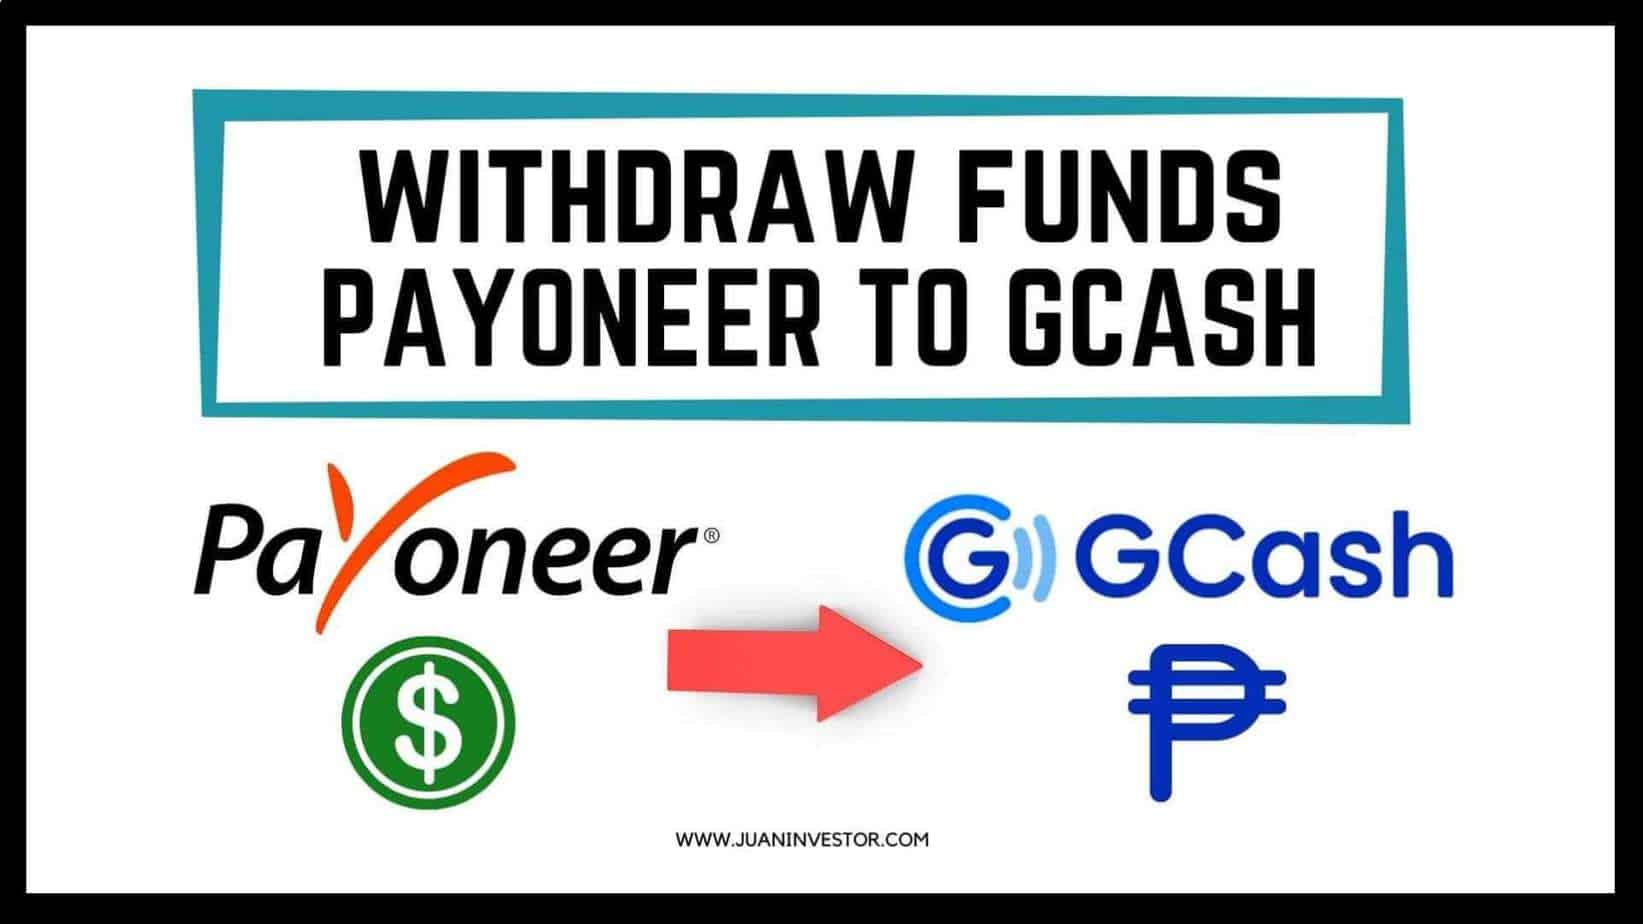 How to Withdraw Funds from Payoneer to GCash: 10 Easy Steps